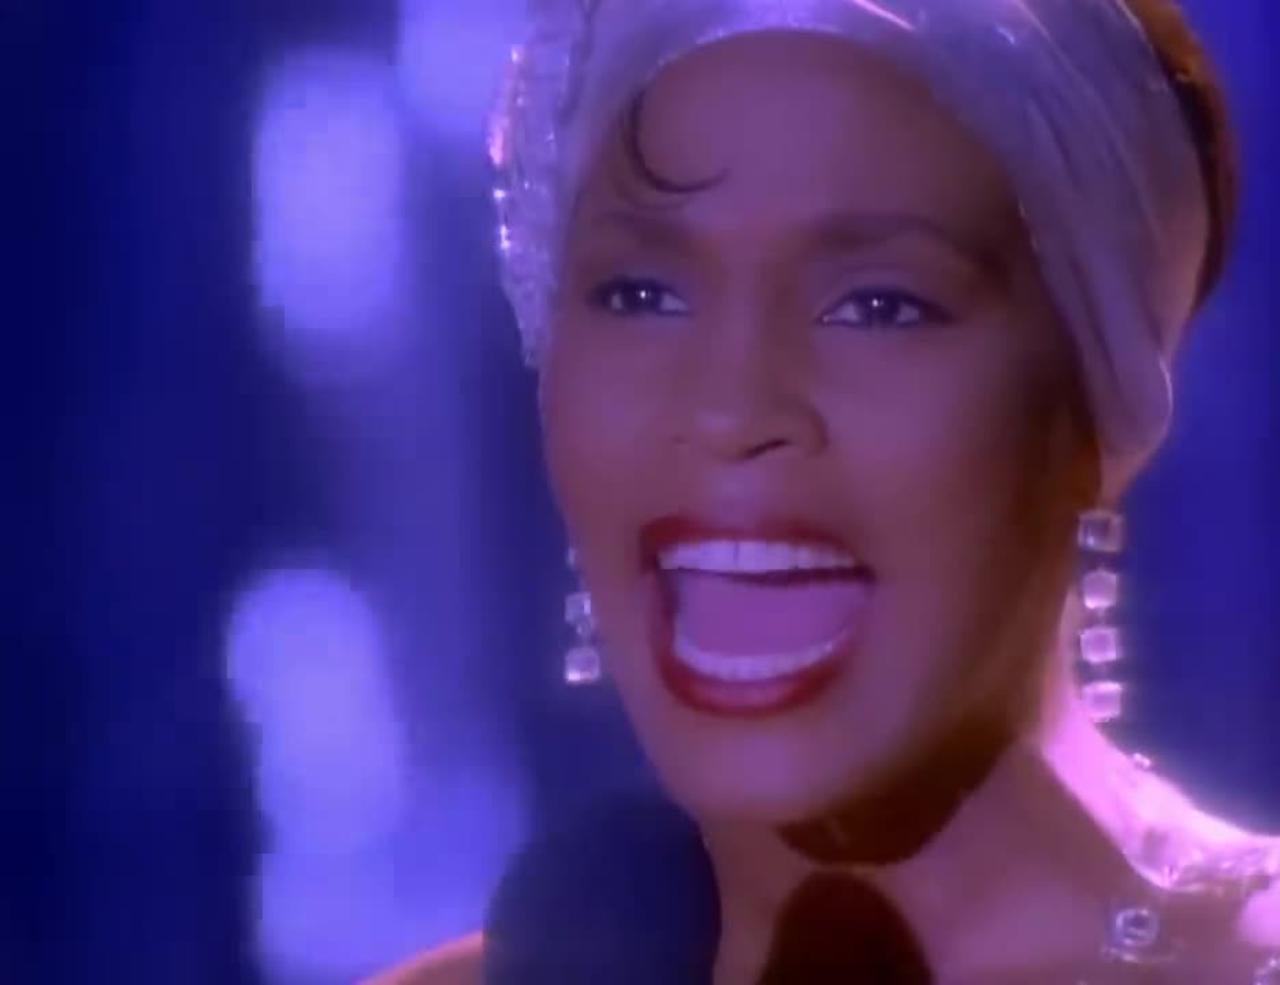 Whitney Houston - I Have Nothing (Official HD Video)